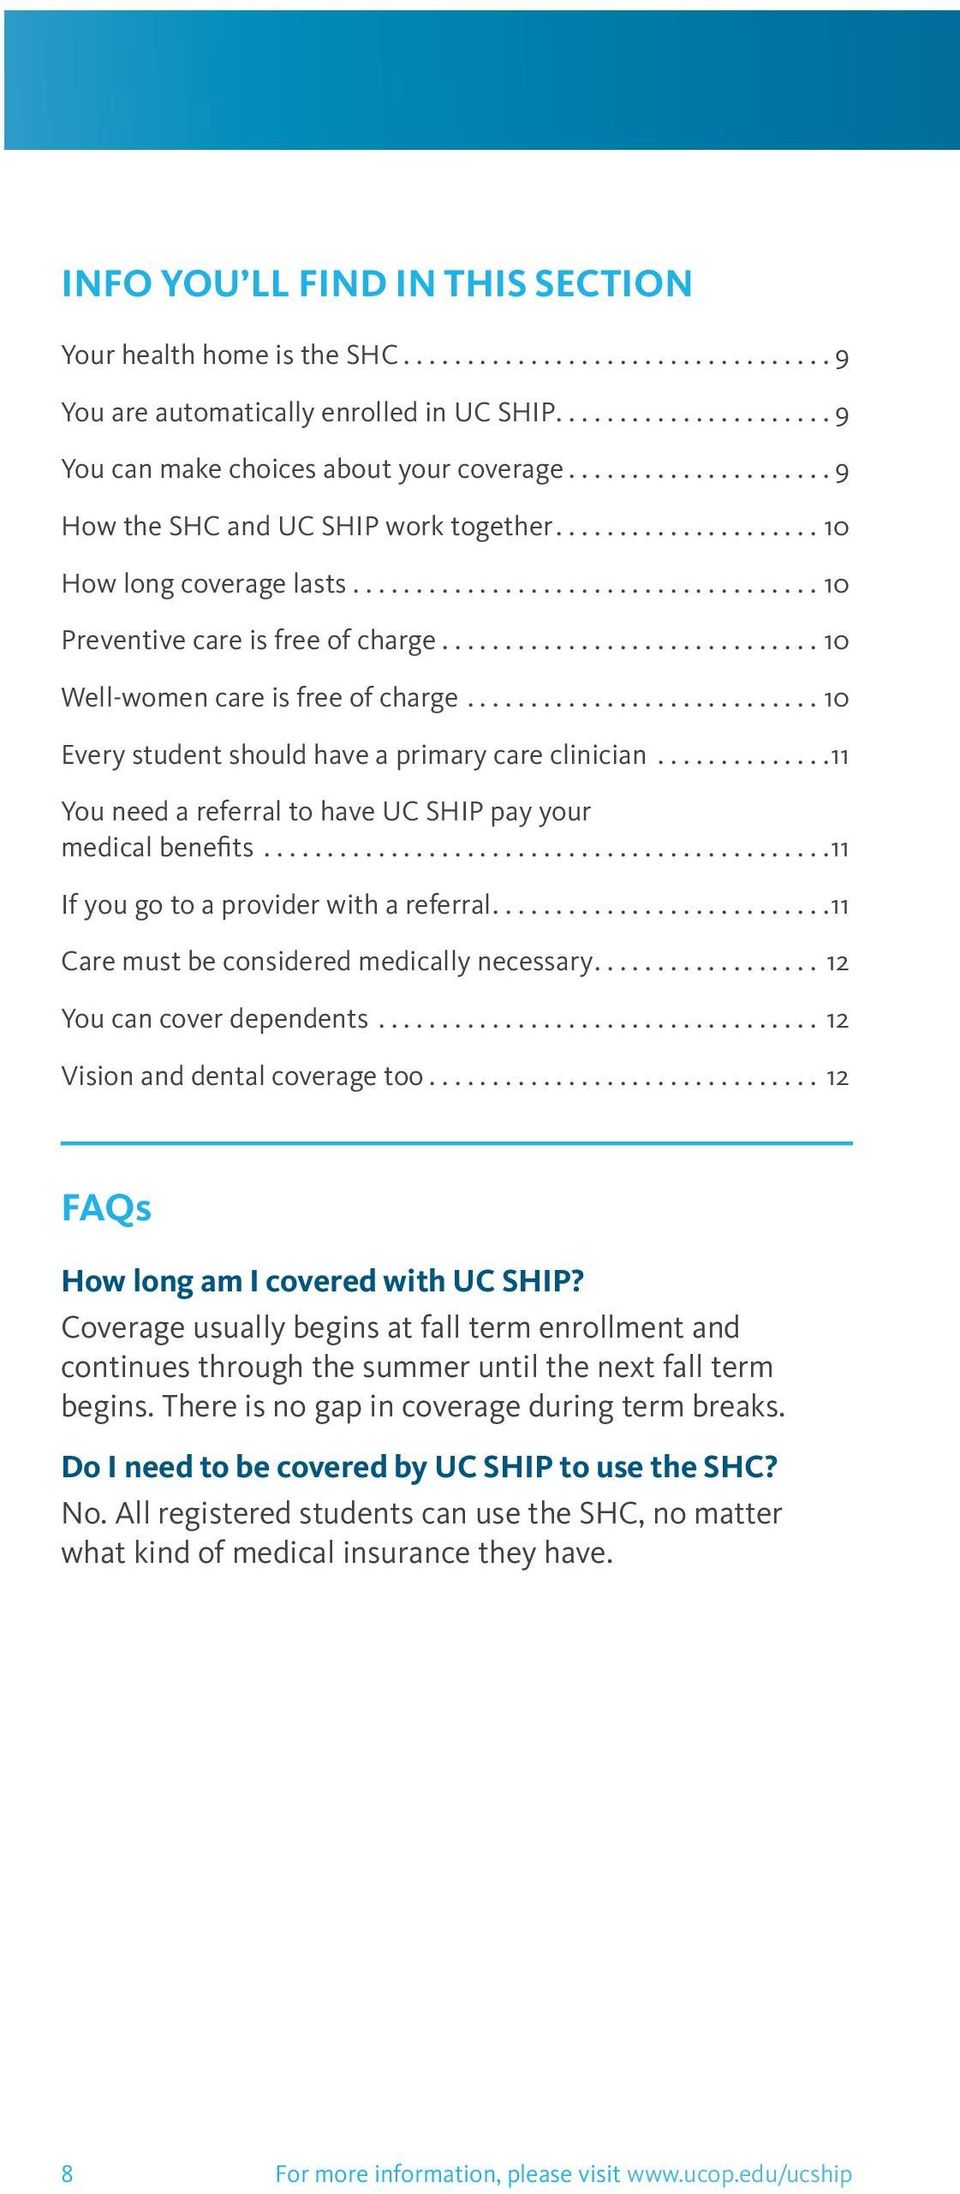 ..11 You need a referral to have UC SHIP pay your medical benefits...11 If you go to a provider with a referral...11 Care must be considered medically necessary... 12 You can cover dependents.